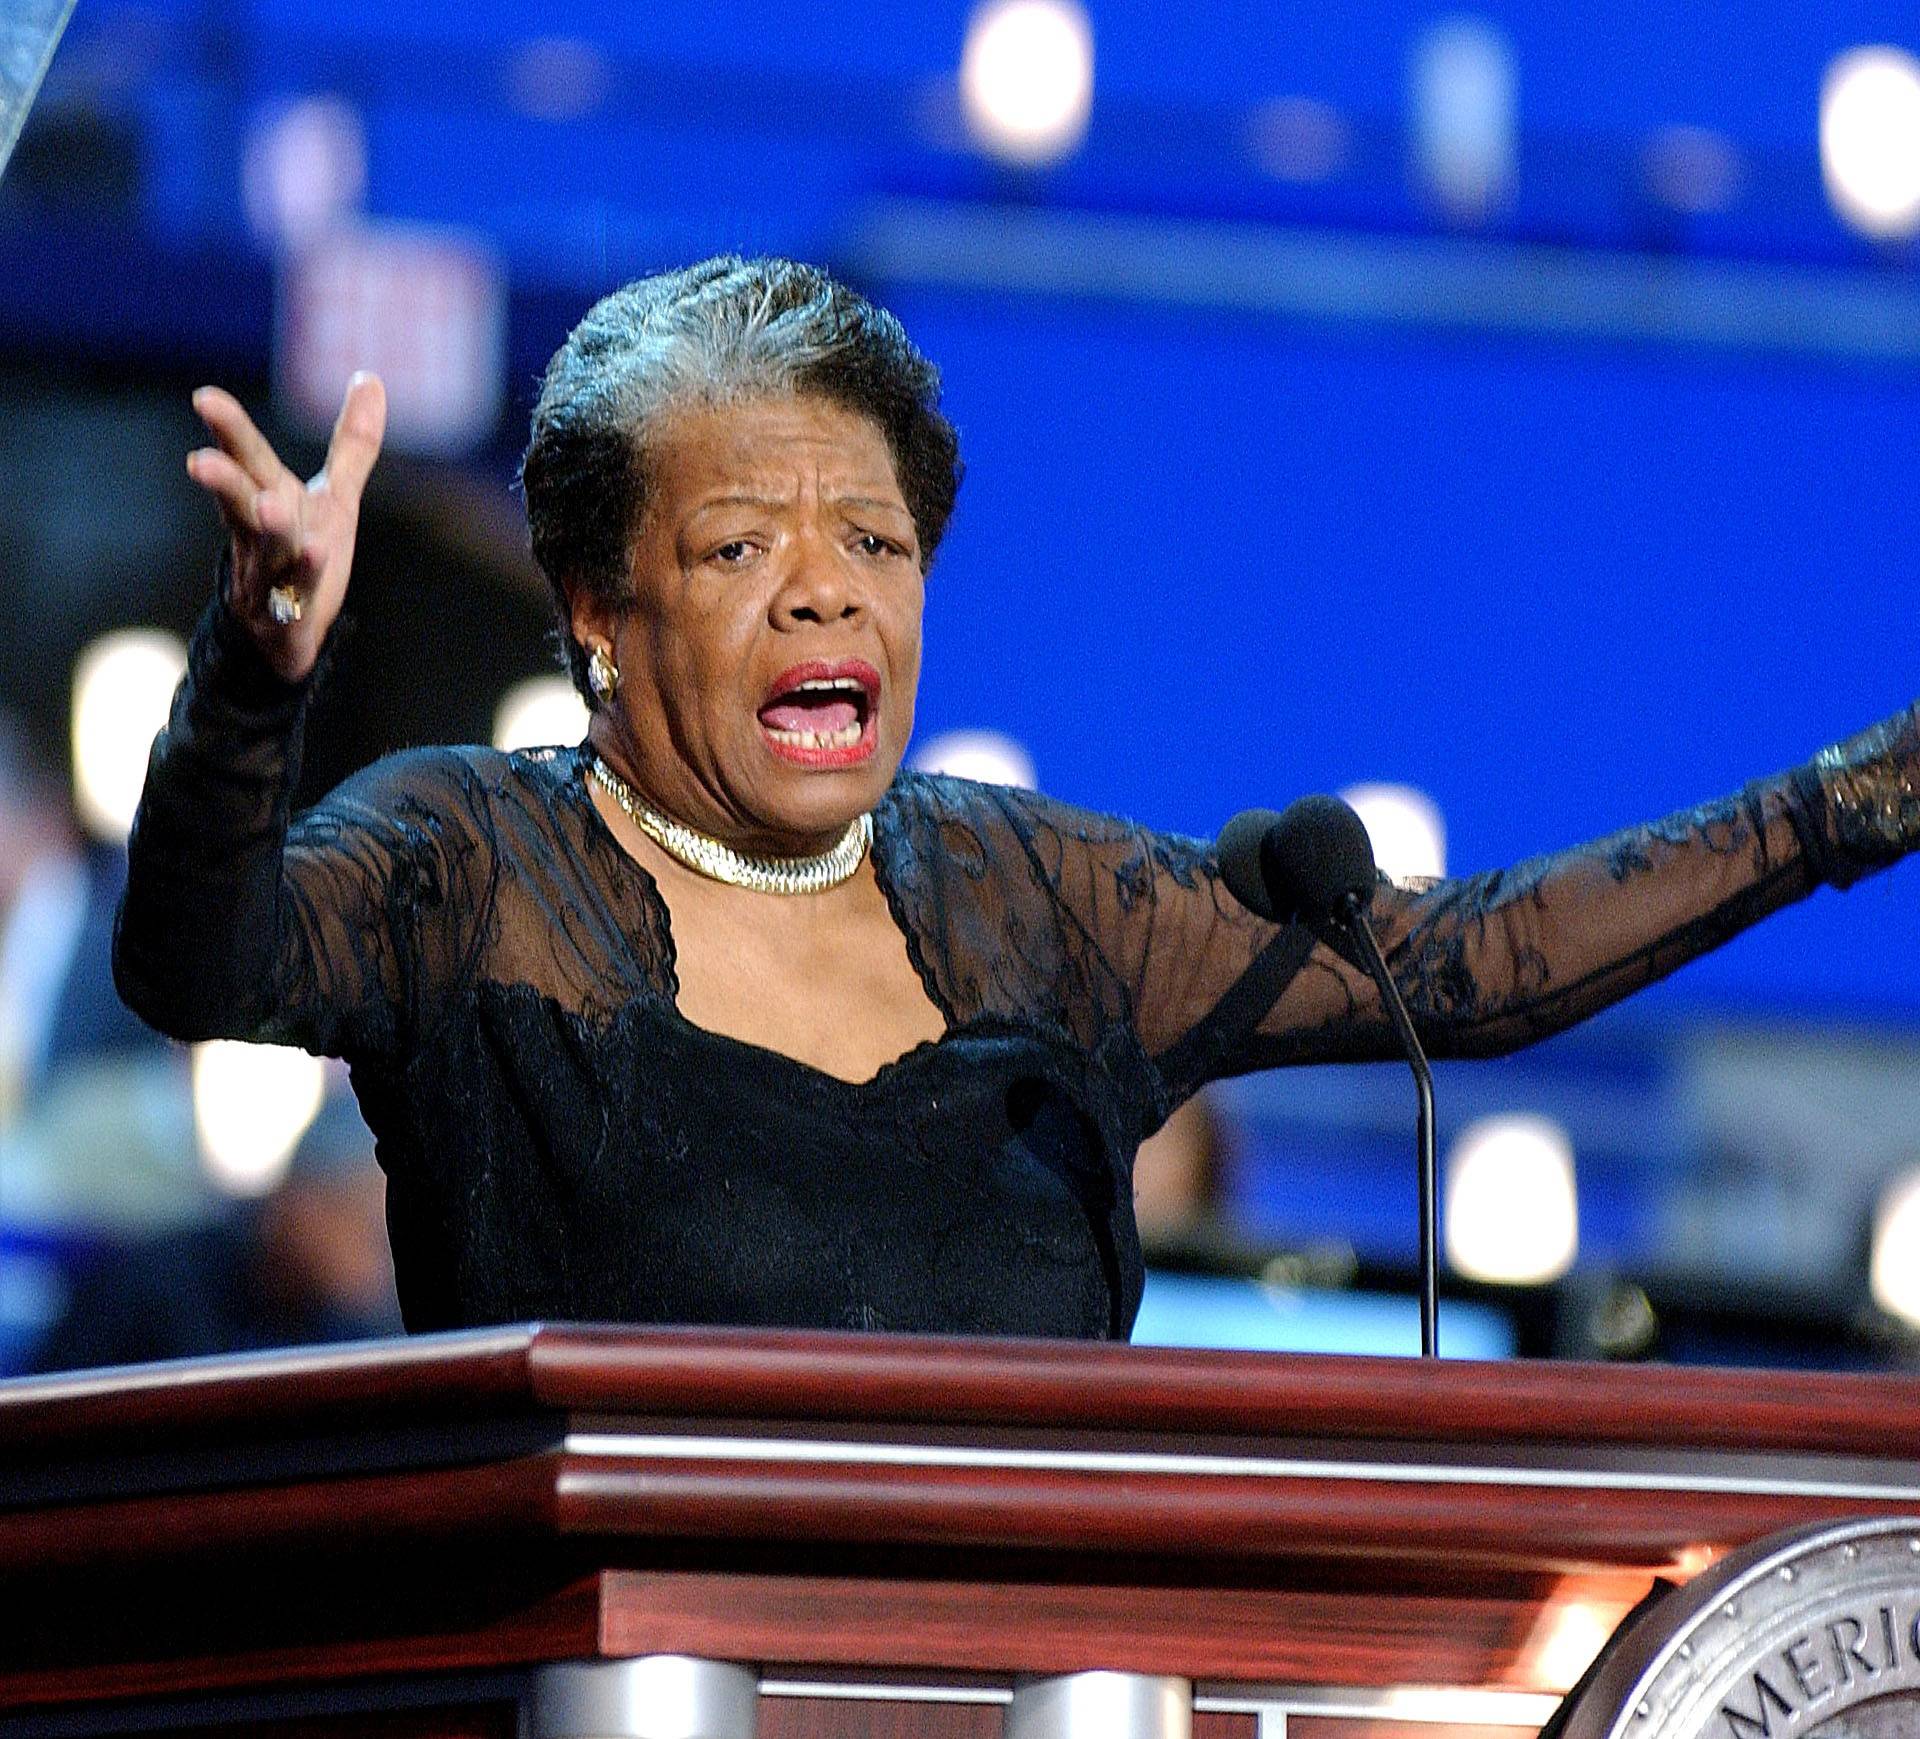 Maya Angelou, renowned poet, novelist and actress, died this morning at age 86